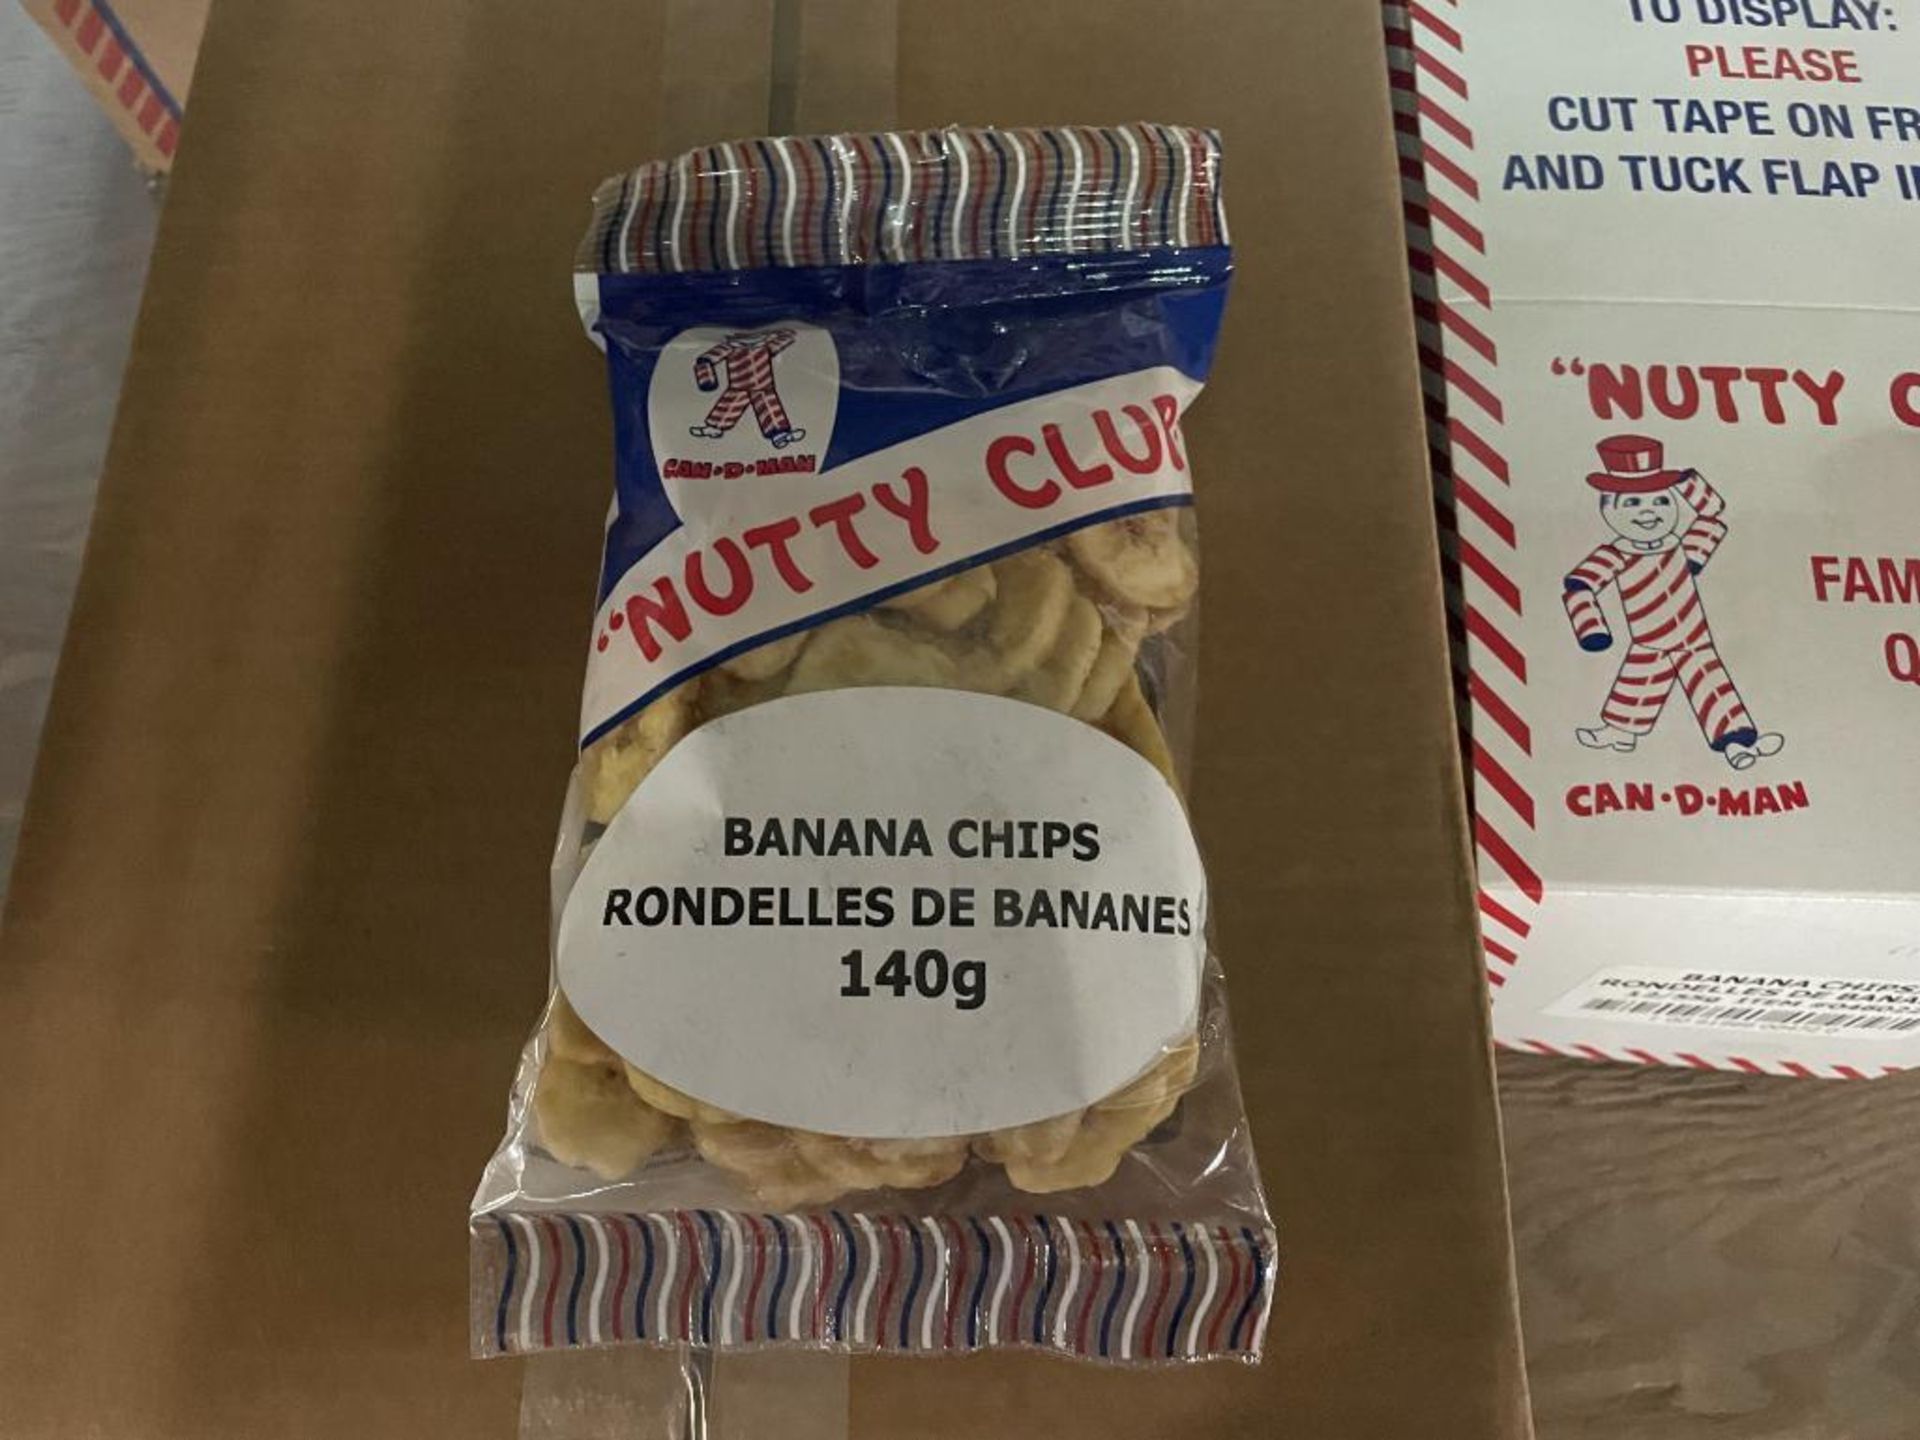 (9) BOXES OF NUTTY CLUB BANANA CHIPS, (7) 12/140G PER BOX & (2) 12/55G PER BOX - Image 2 of 4